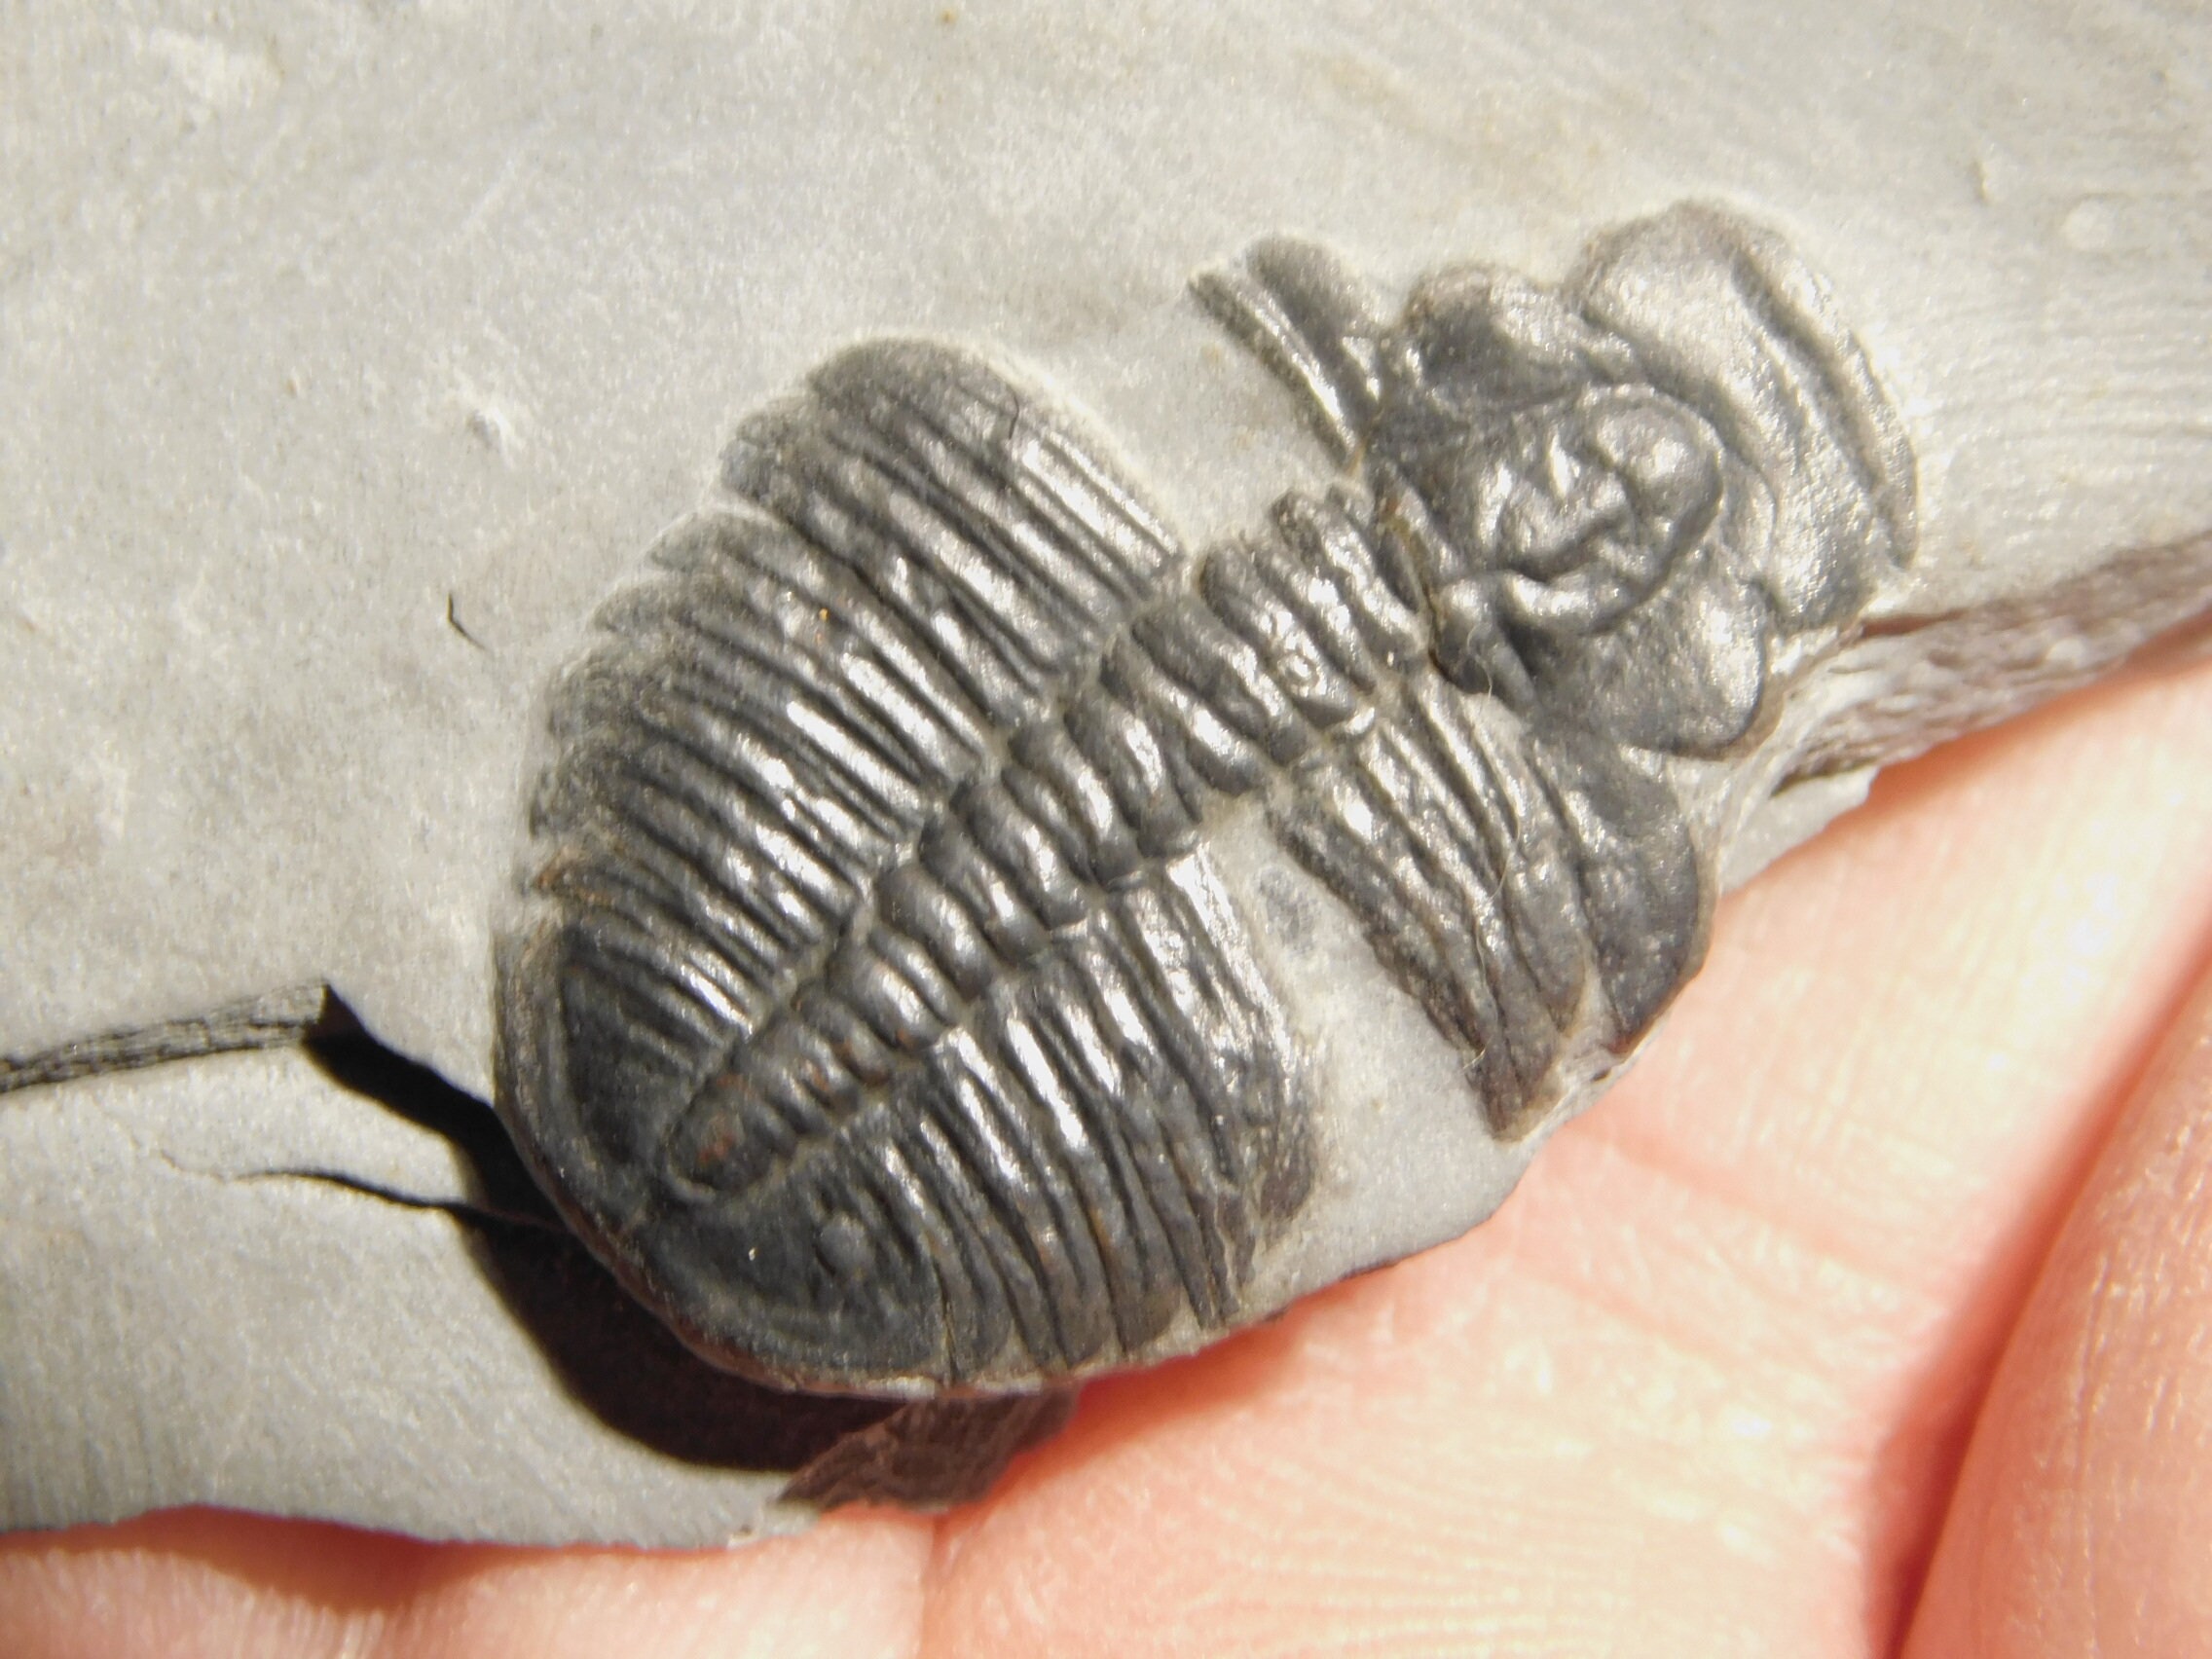 Trilobite Fossil With an Anomalocaris BITE MARK Utah  - Etsy Finland